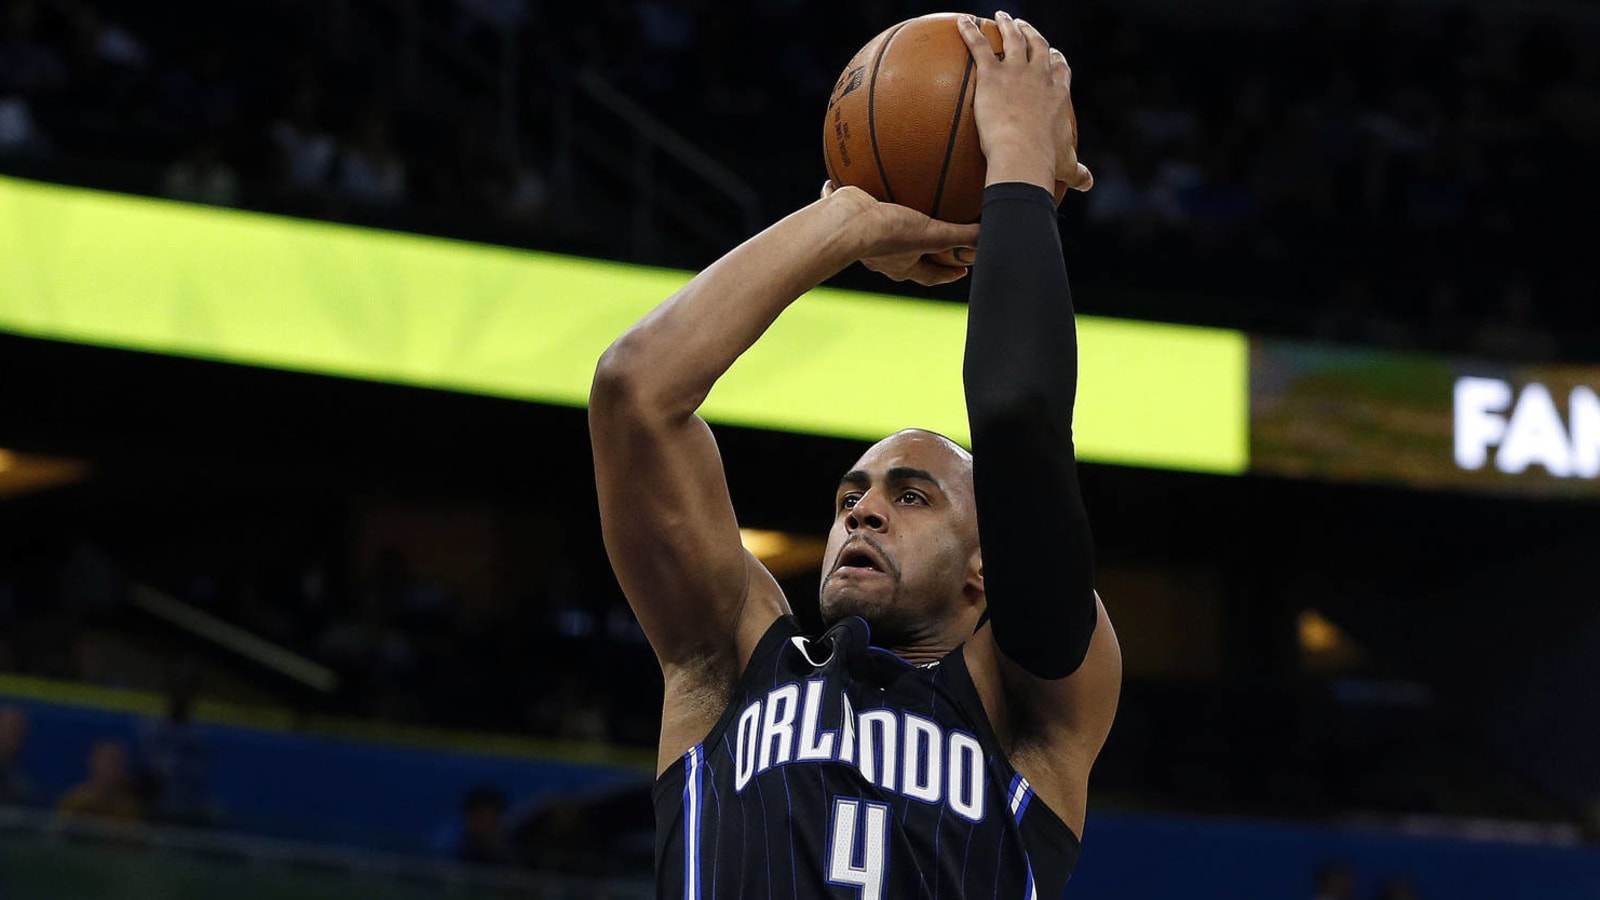 Report: Former NBA star Arron Afflalo part of group trying to buy Timberwolves